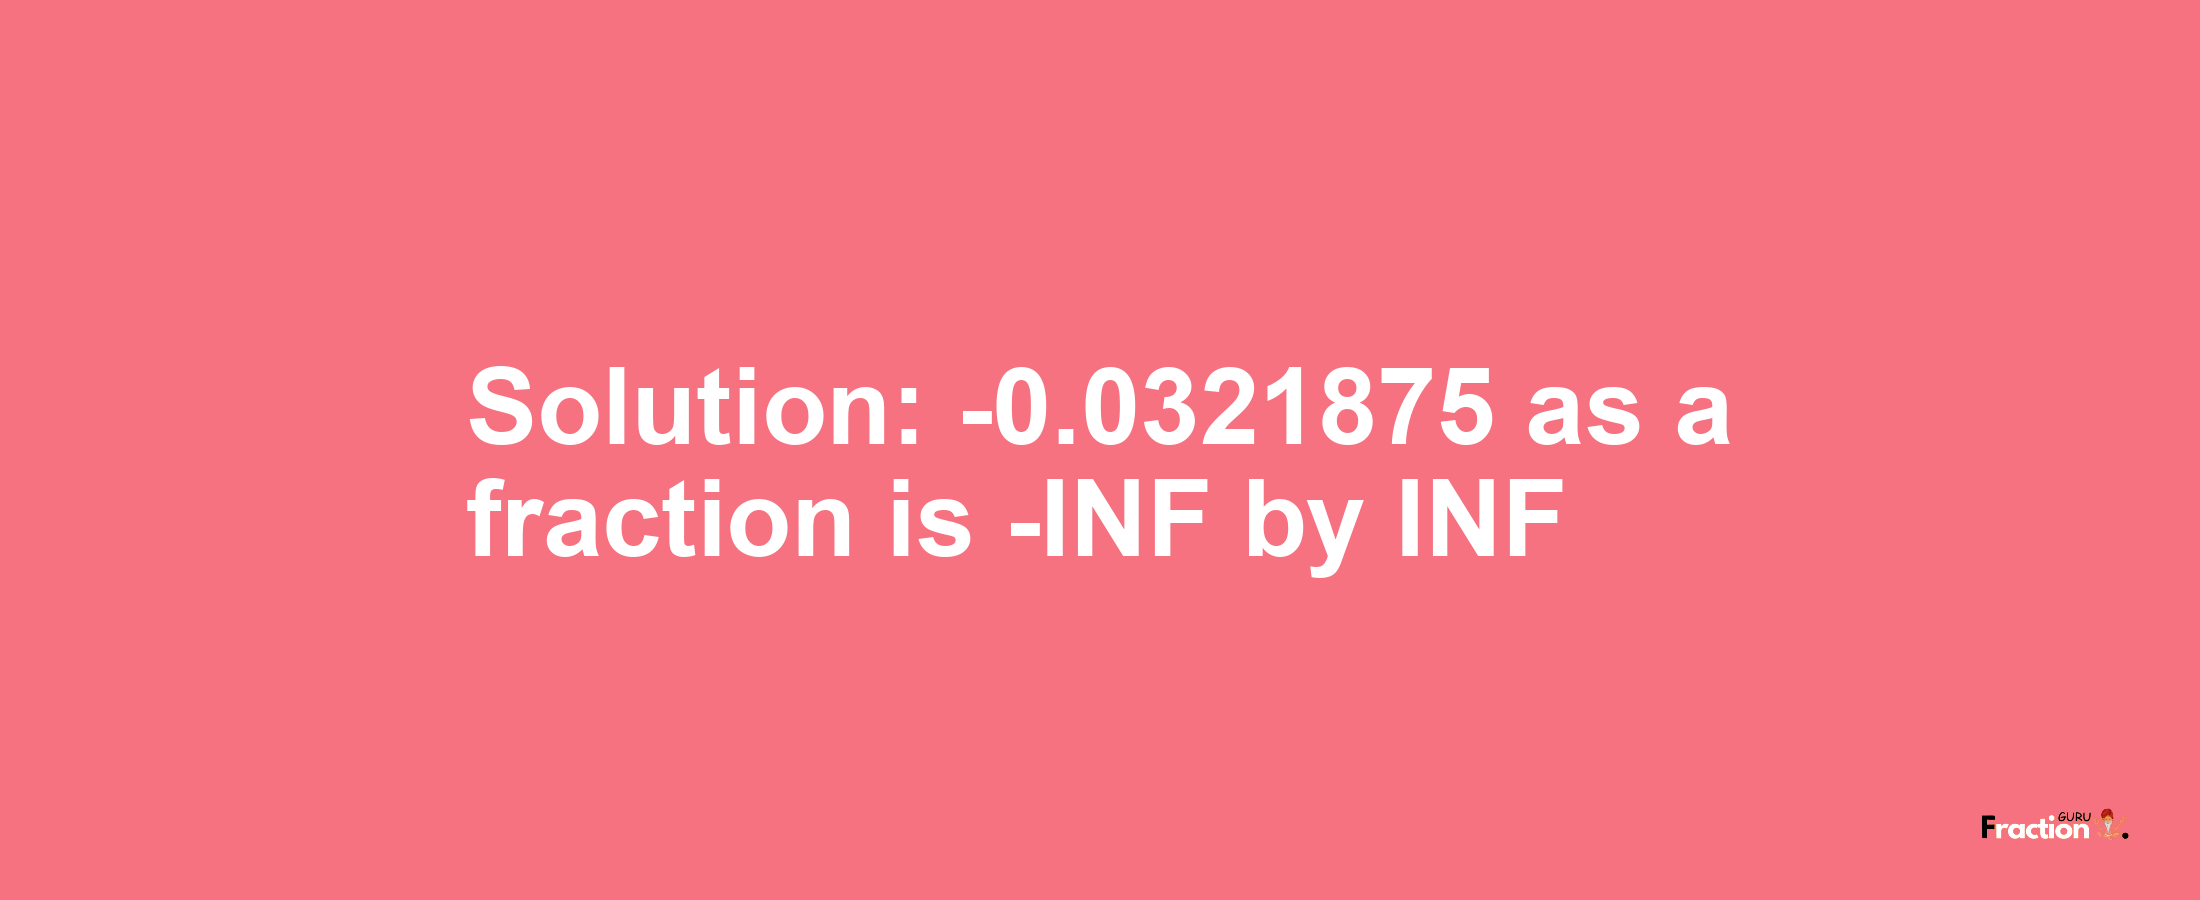 Solution:-0.0321875 as a fraction is -INF/INF